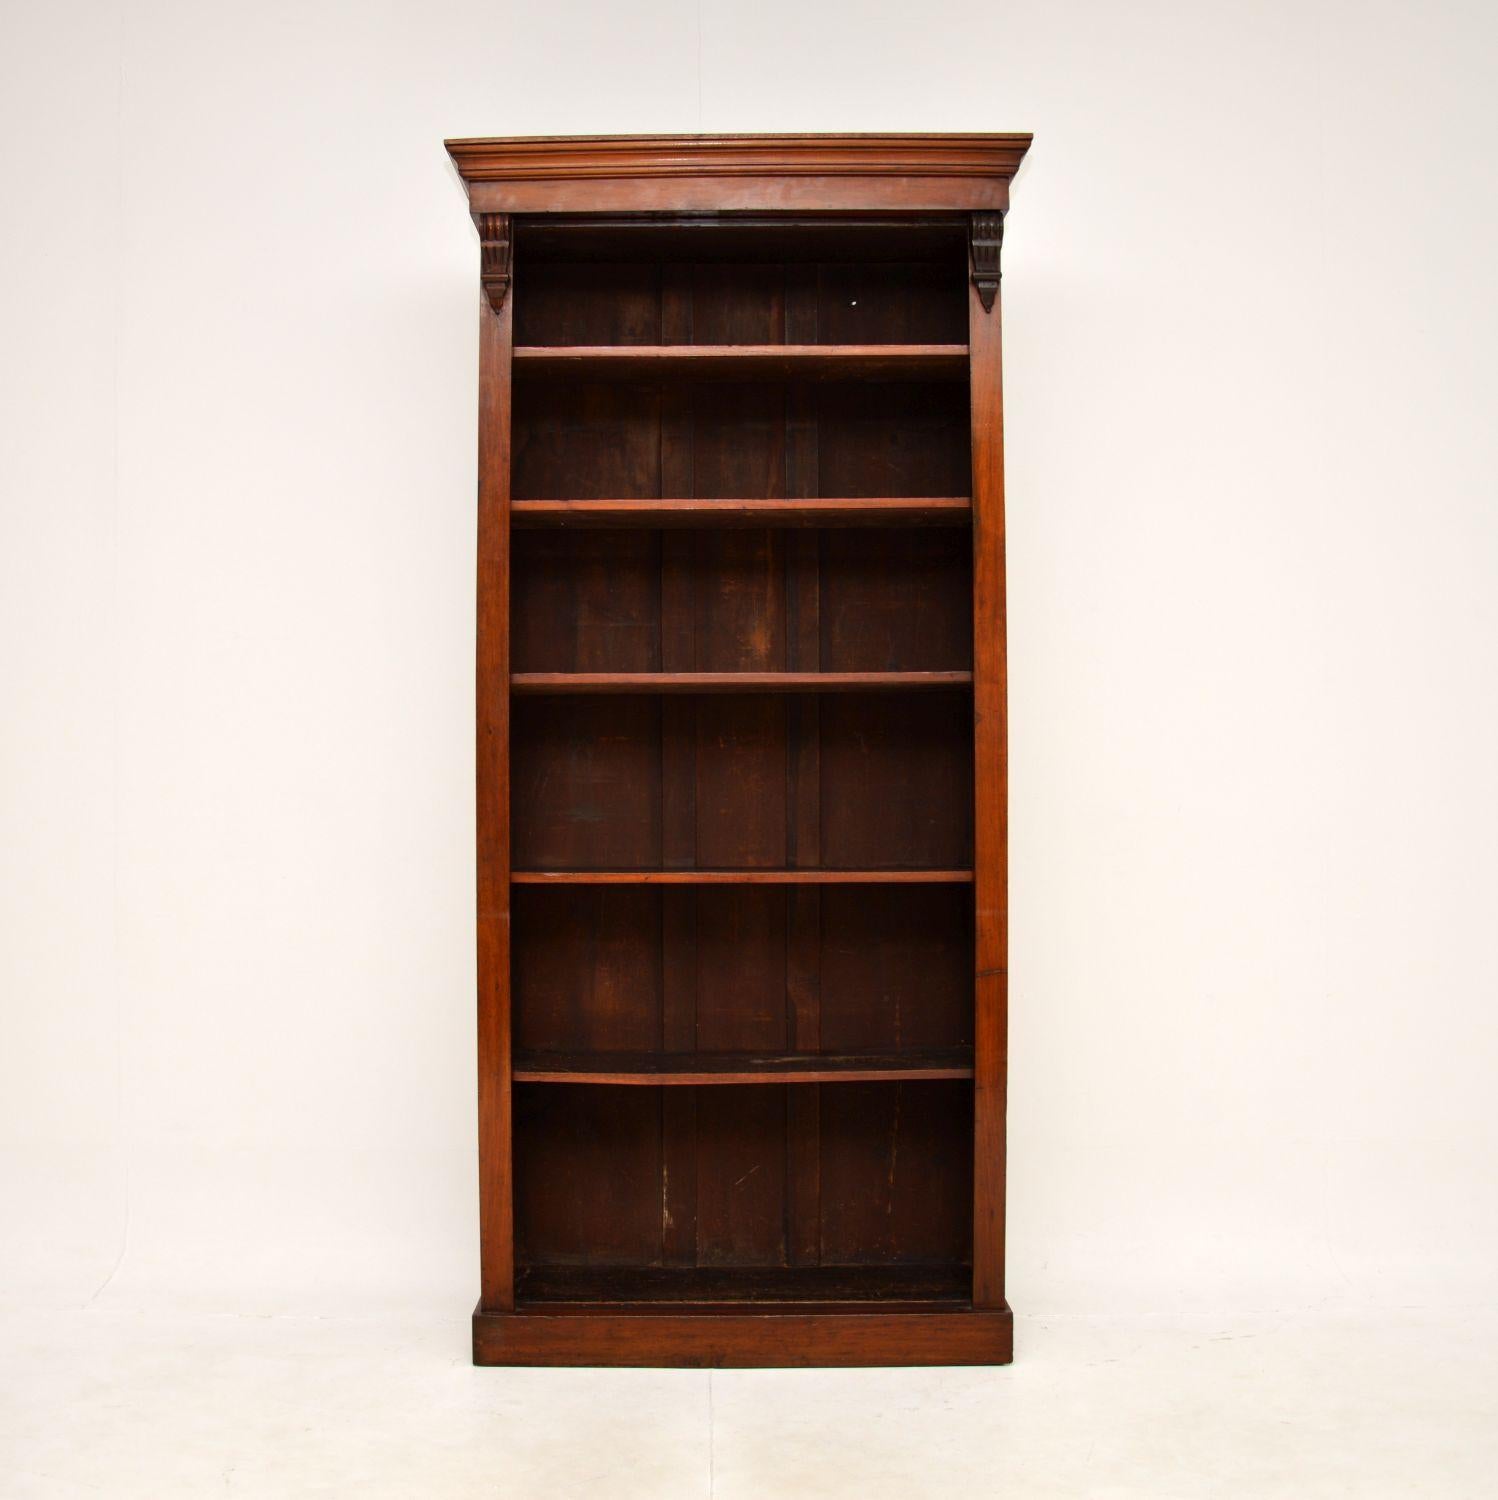 A smart and very useful antique Victorian open bookcase. This was made in England, it dates from around the 1860-1880 period.

It is a great size, very tall and slim, with lots of storage space. There are five adjustable shelves, this sits on a